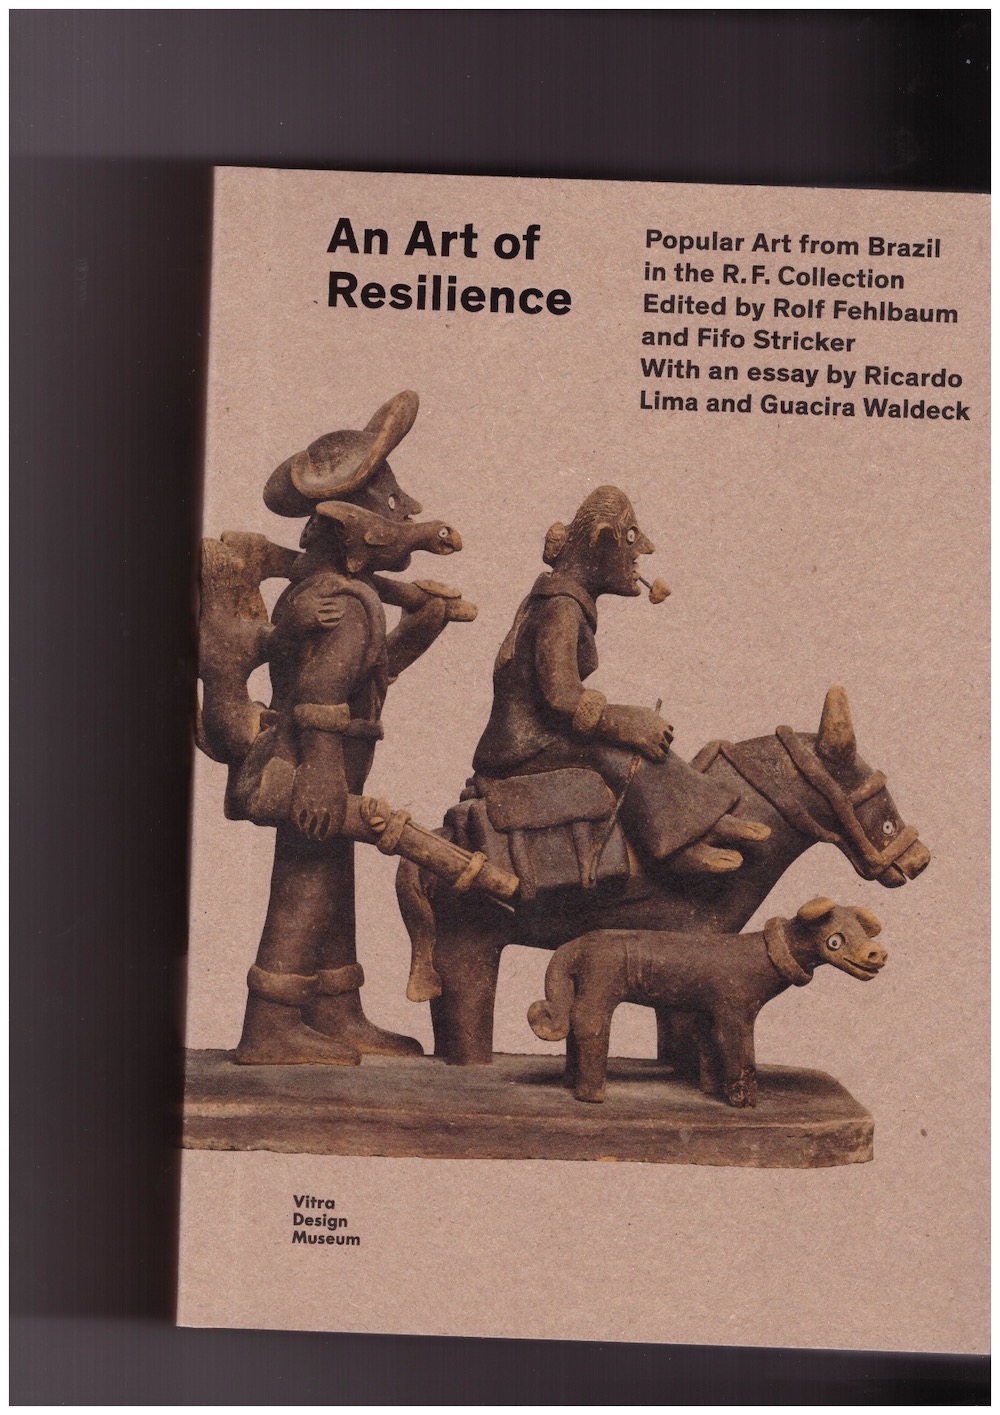 FEHLBAUM, Rolf; STRICKER, Fifo (eds.) - An Art of Resilience: Popular Art from Brazil in the R.F. Collection